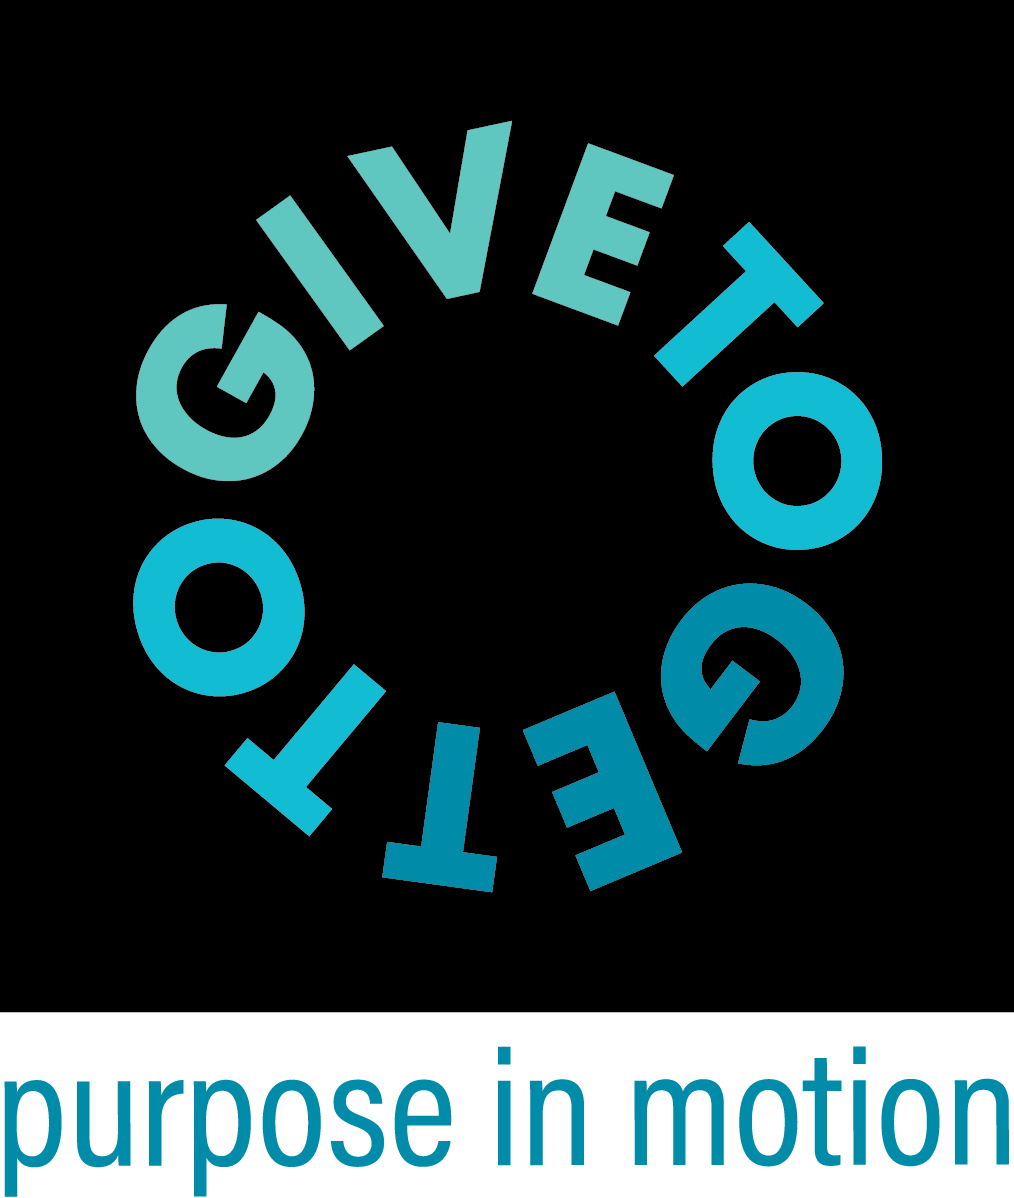 Give To Get | A Social Impact Company